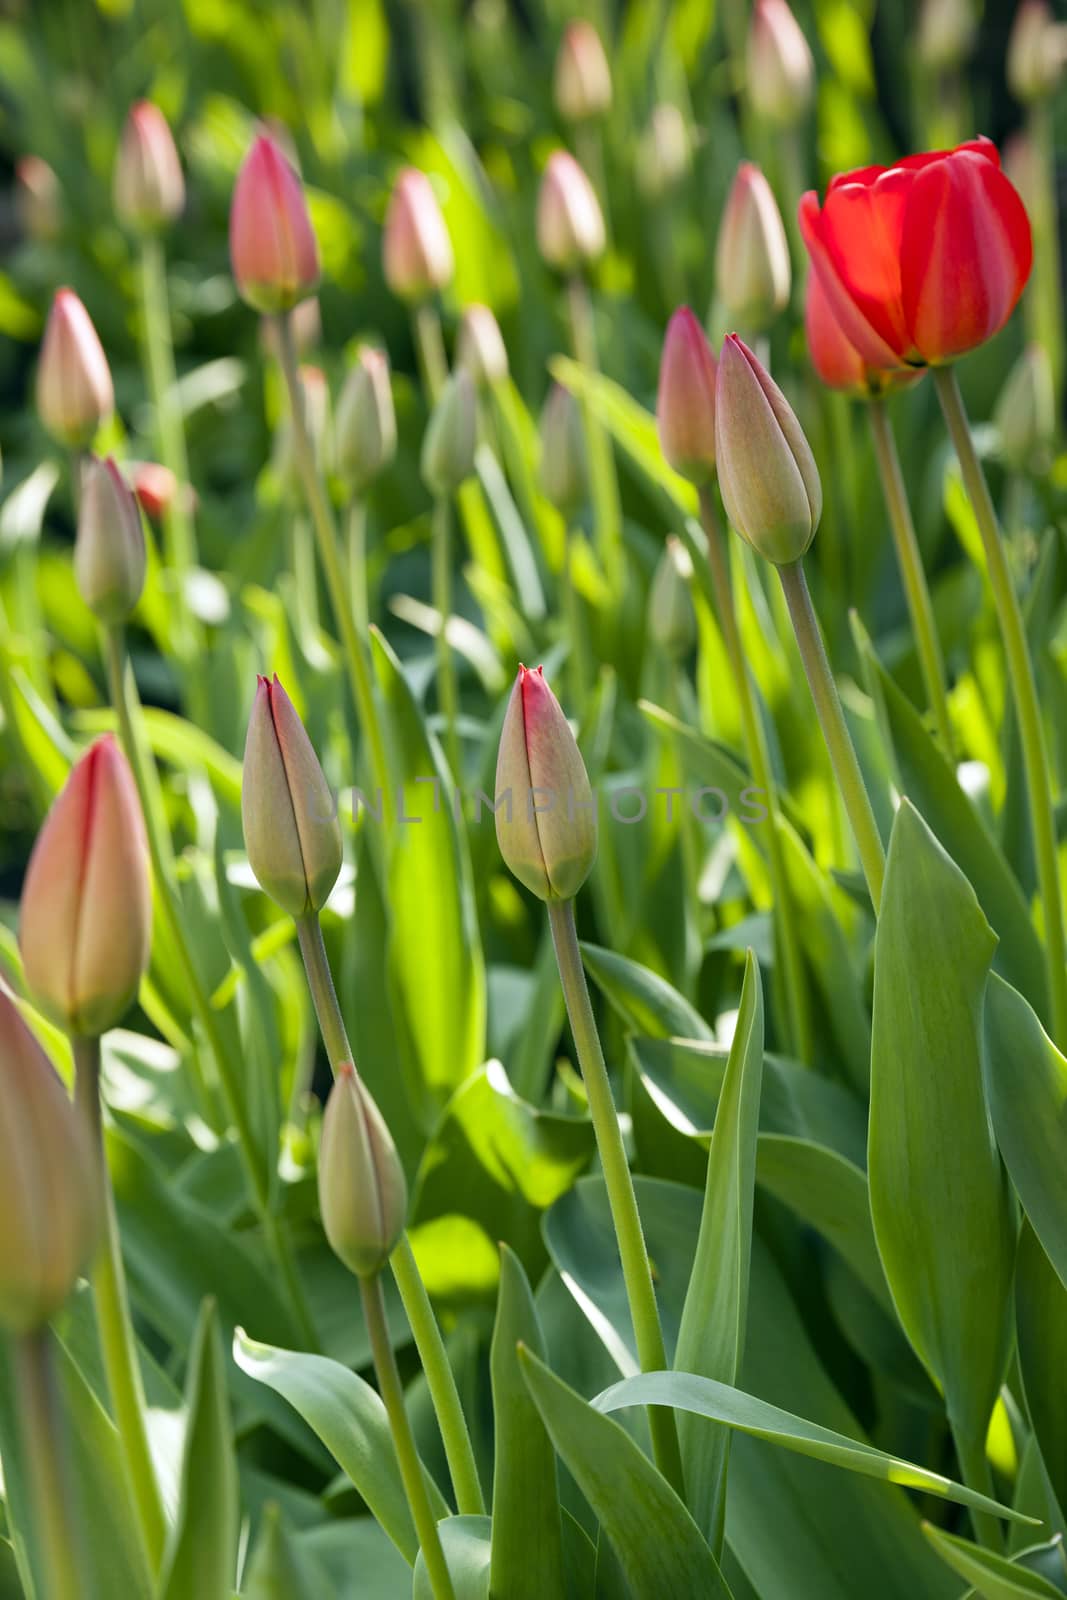   tulips of dark color growing in a field. focus on the central flower